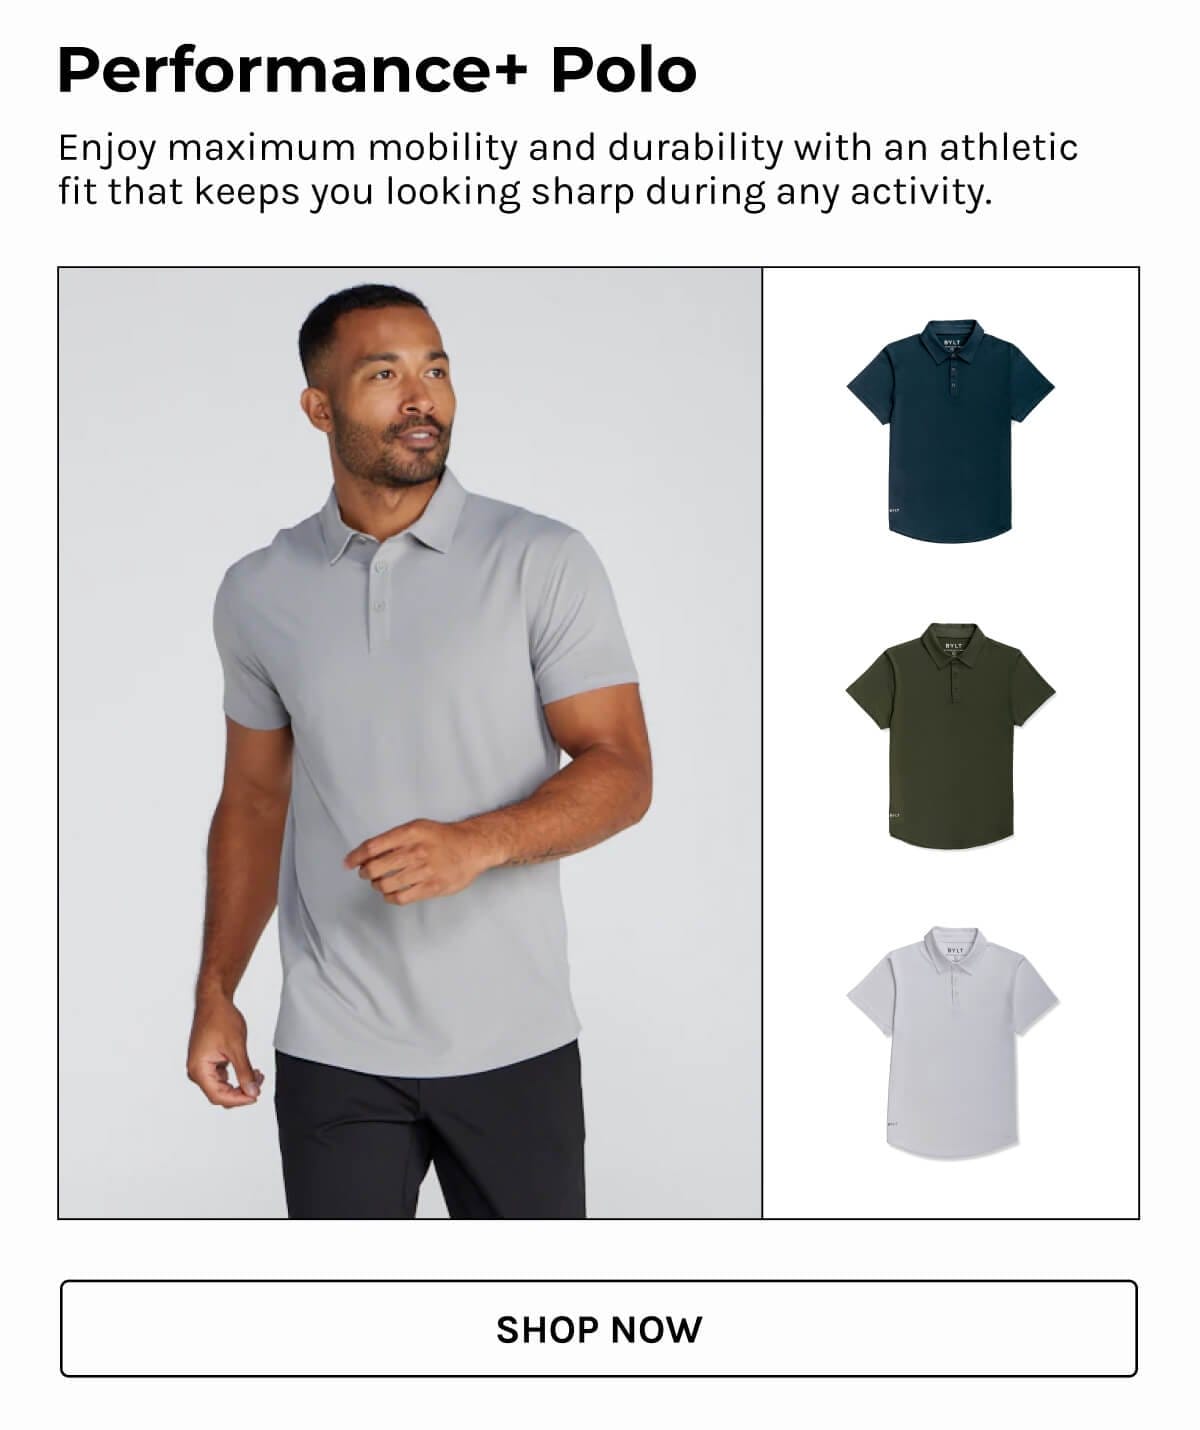 Performance+ Polo: Enjoy maximum mobility and durability with an athletic fit that keeps you looking sharp during any activity